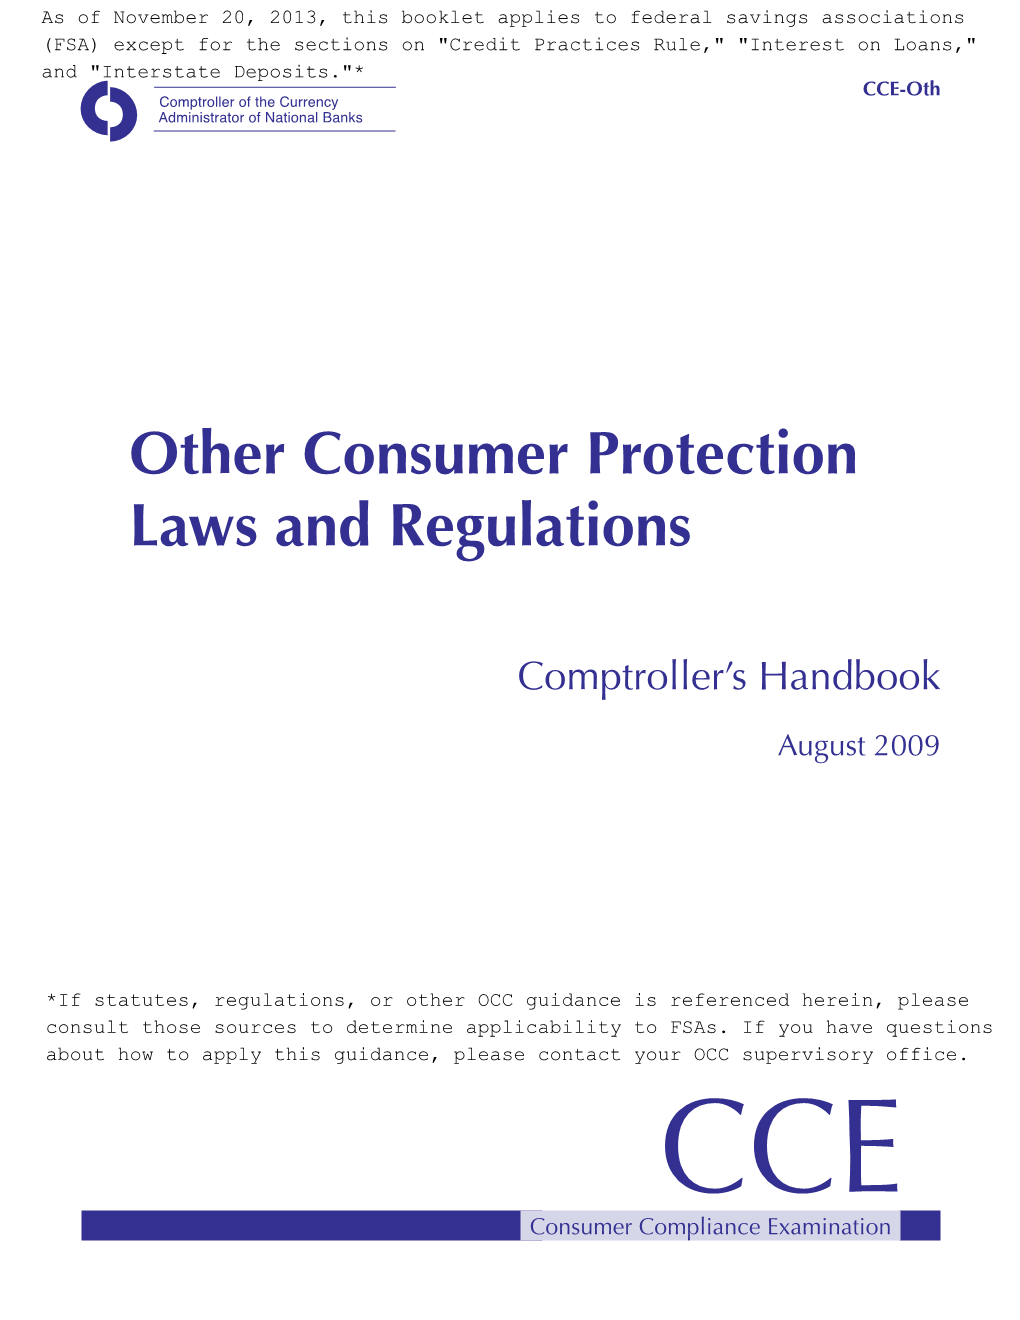 Other Consumer Protection Laws and Regulations